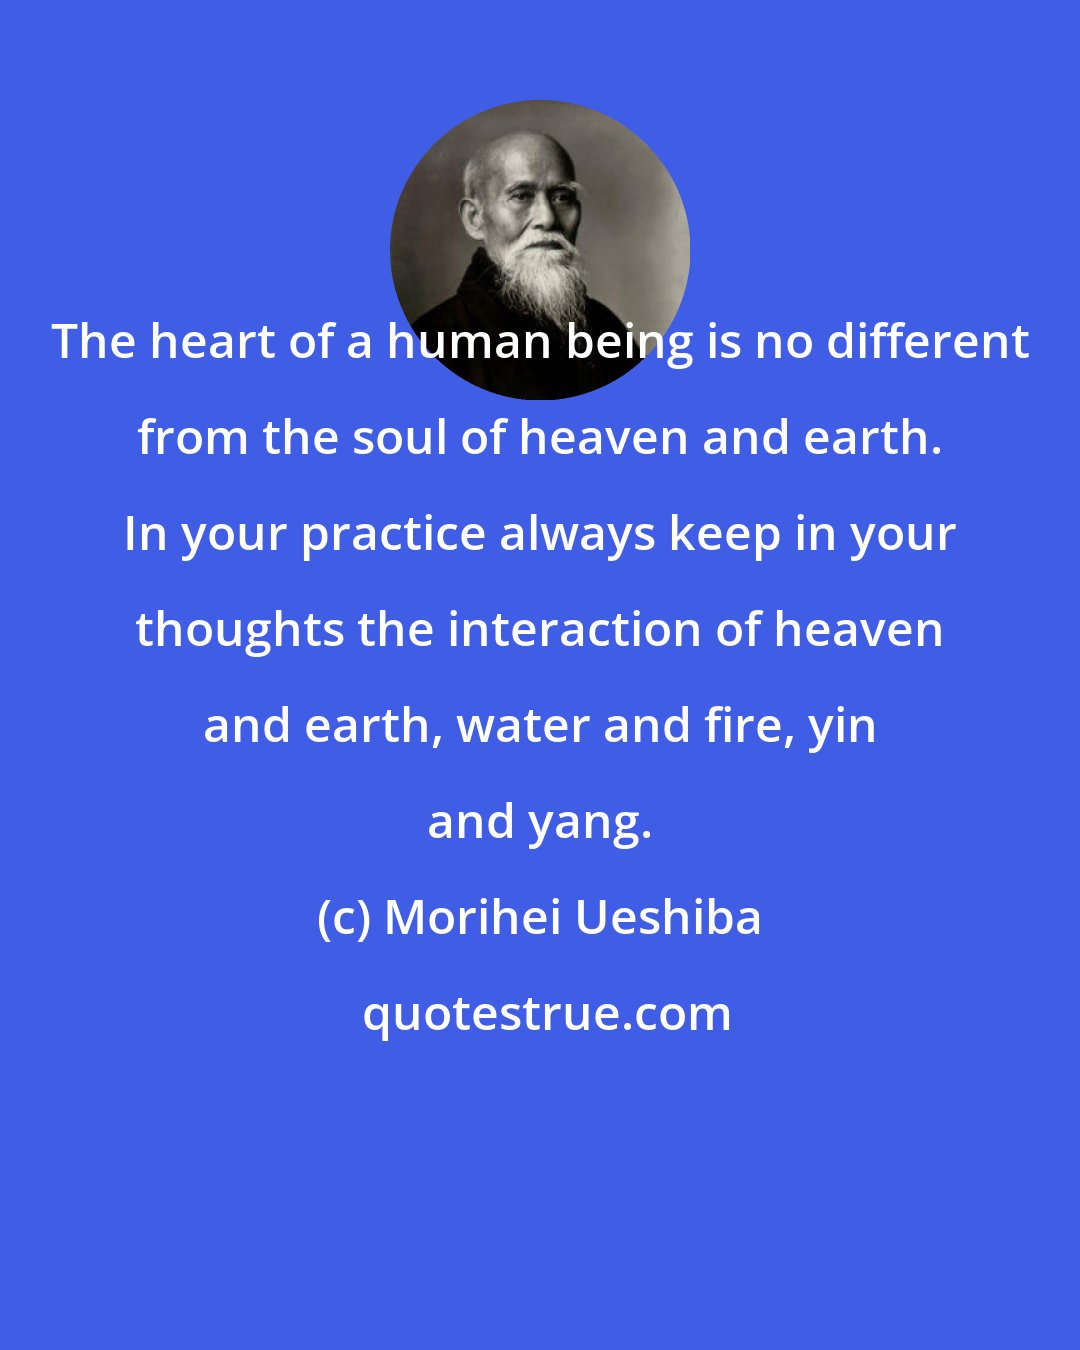 Morihei Ueshiba: The heart of a human being is no different from the soul of heaven and earth. In your practice always keep in your thoughts the interaction of heaven and earth, water and fire, yin and yang.